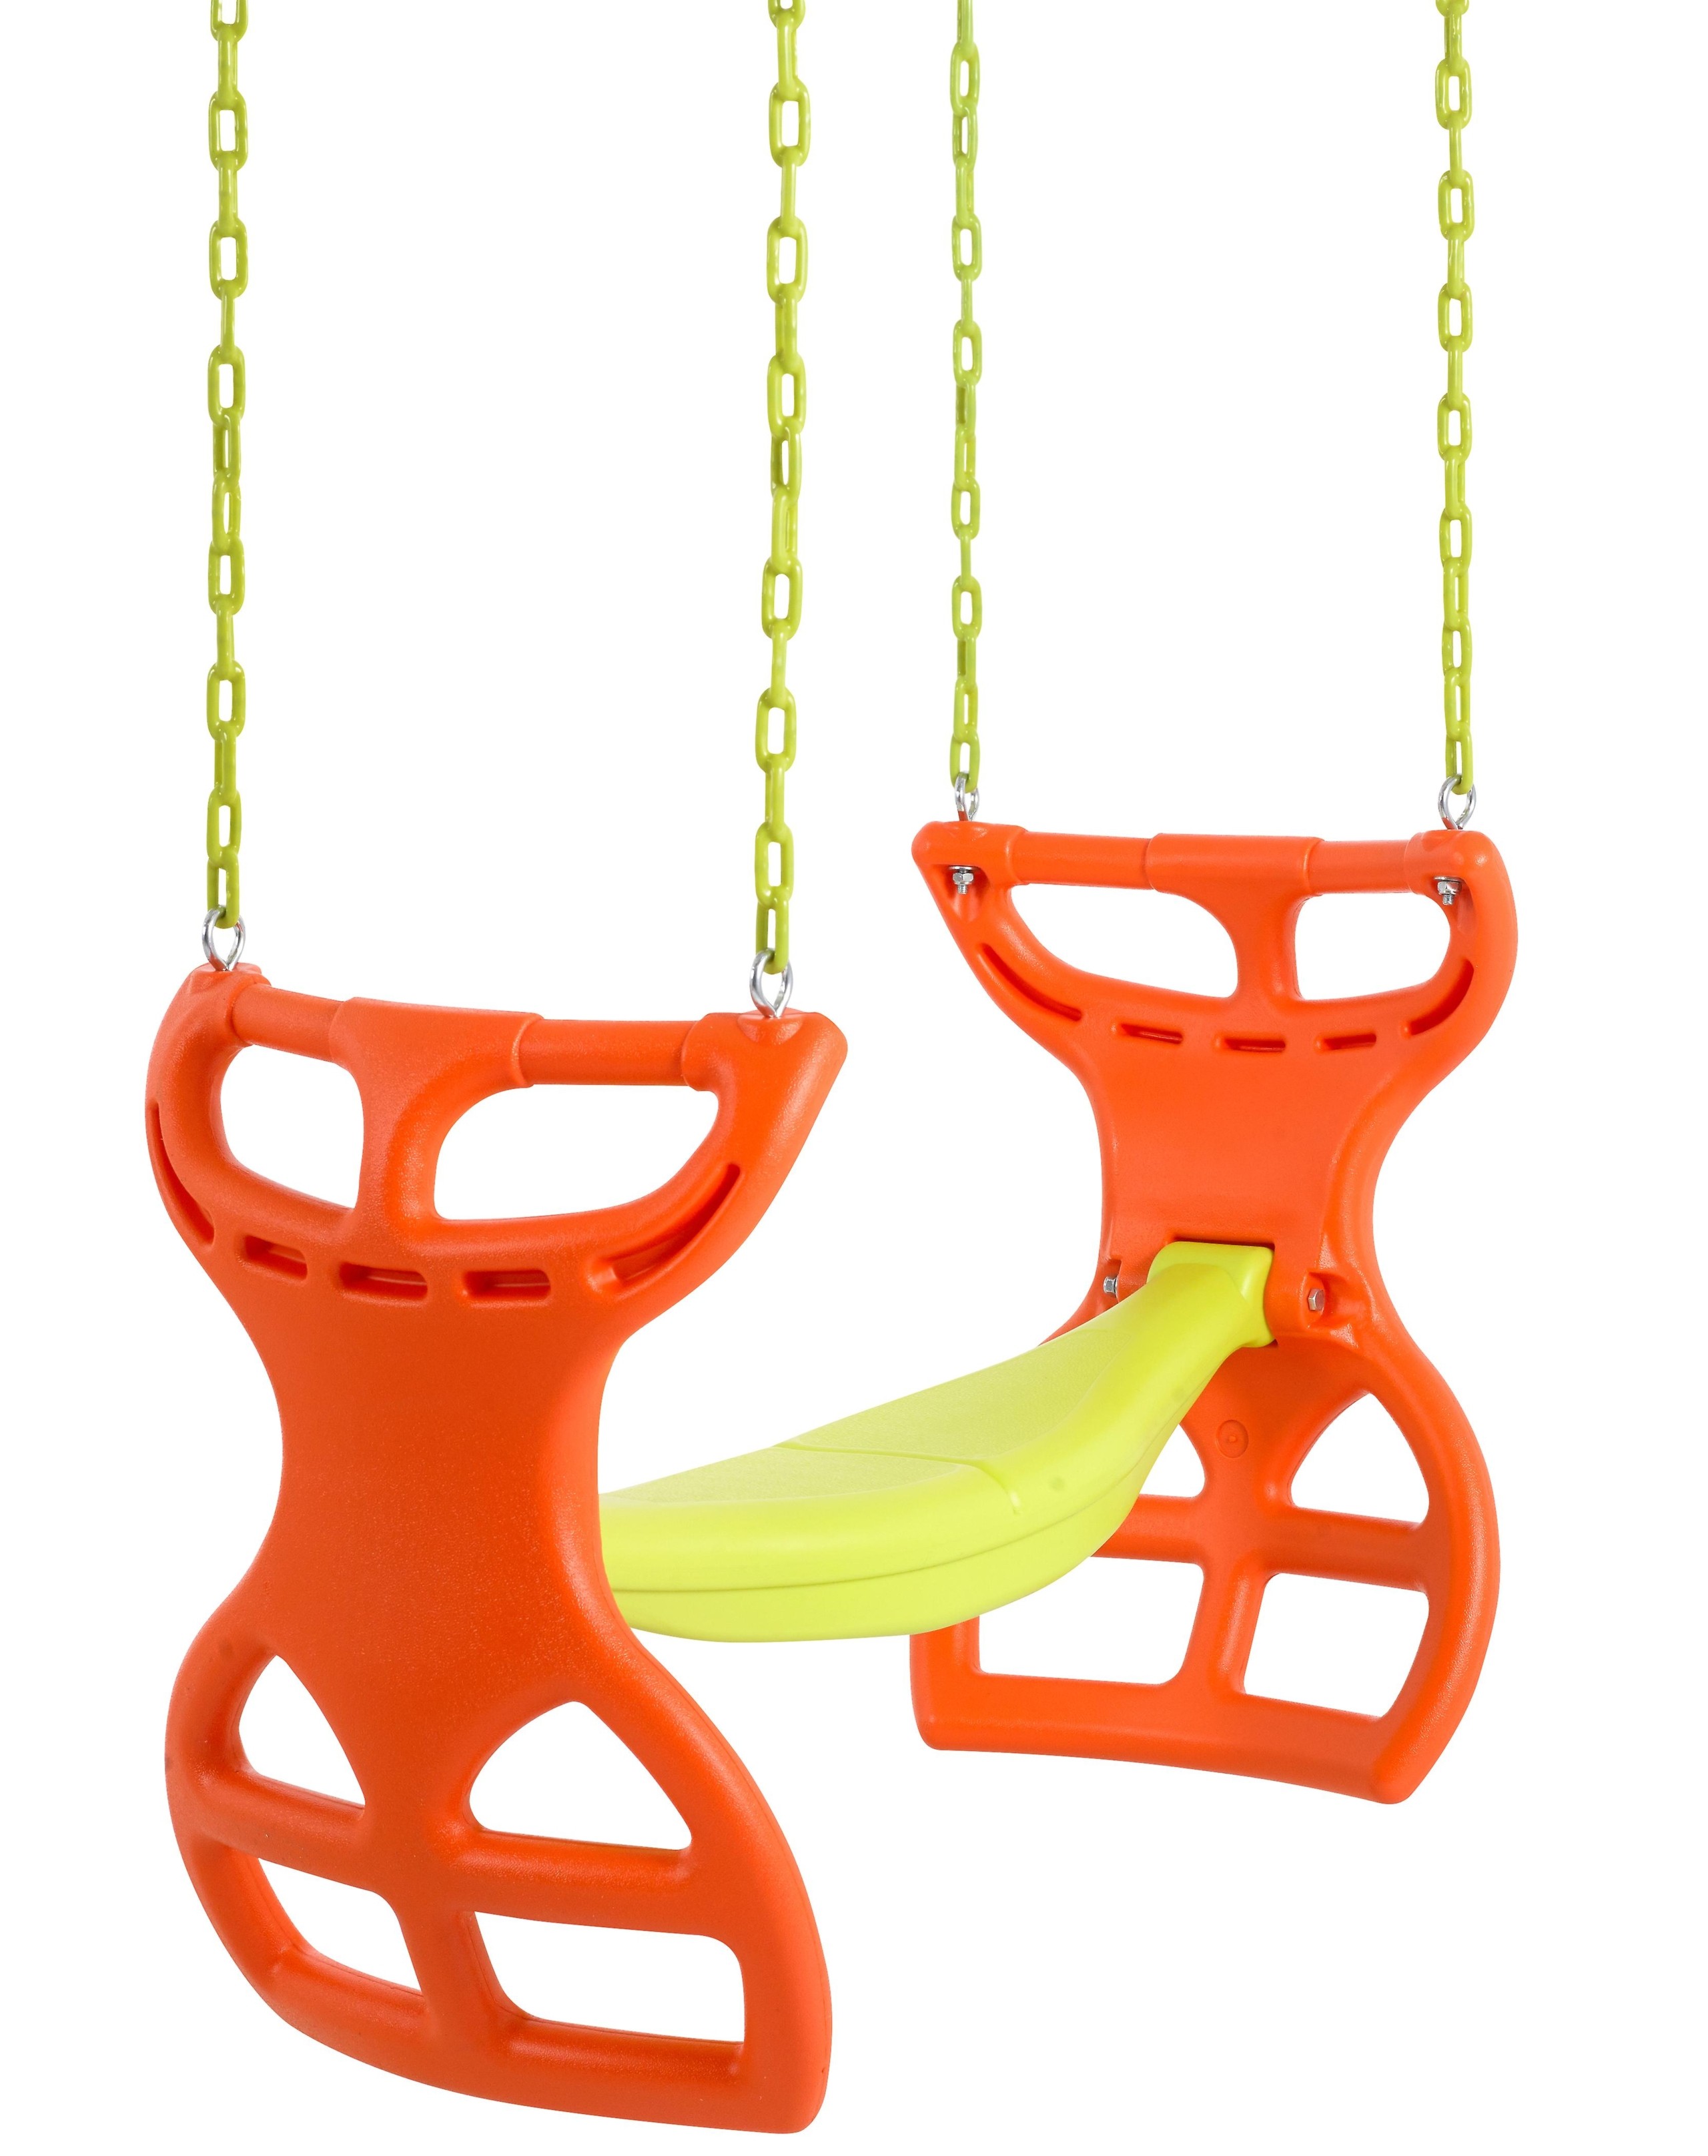 Plastic Two Person Glider with Chains and Hooks